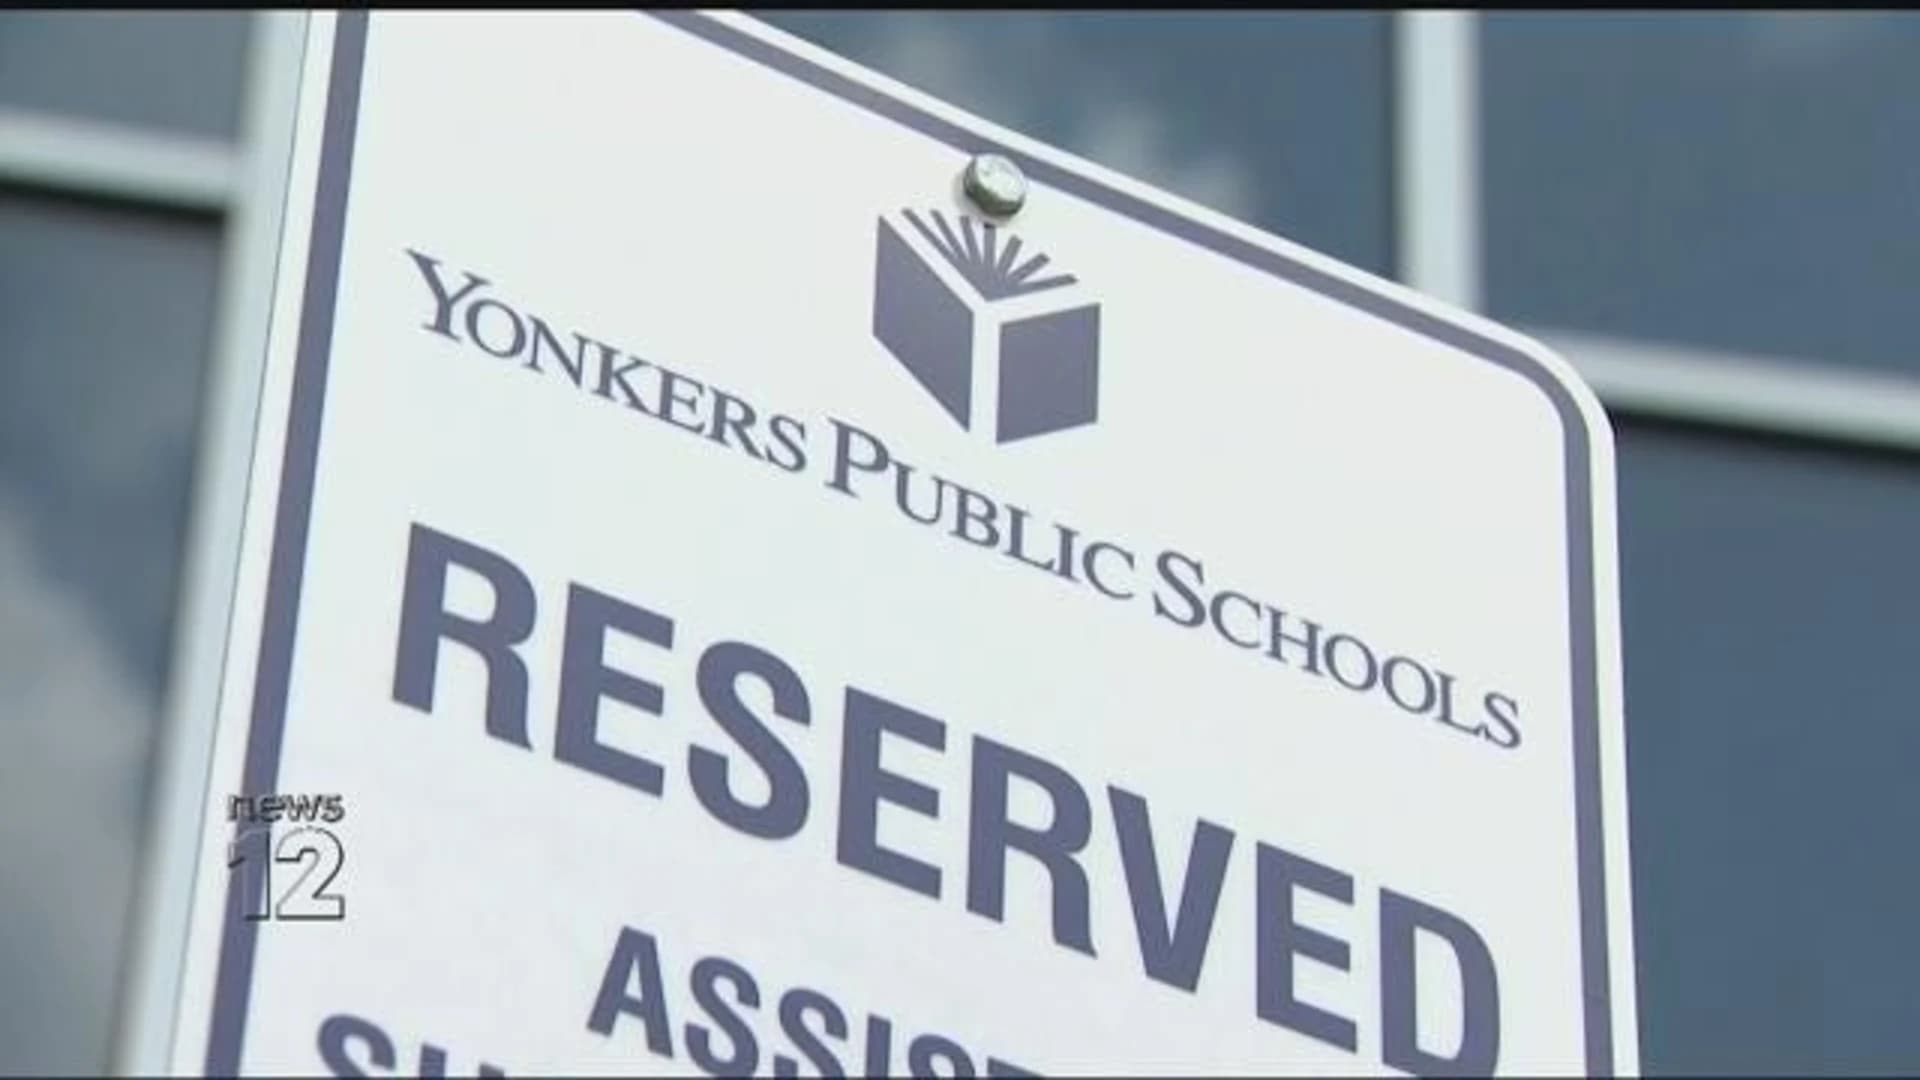 Yonkers School District submits hybrid learning plan for fall reopening